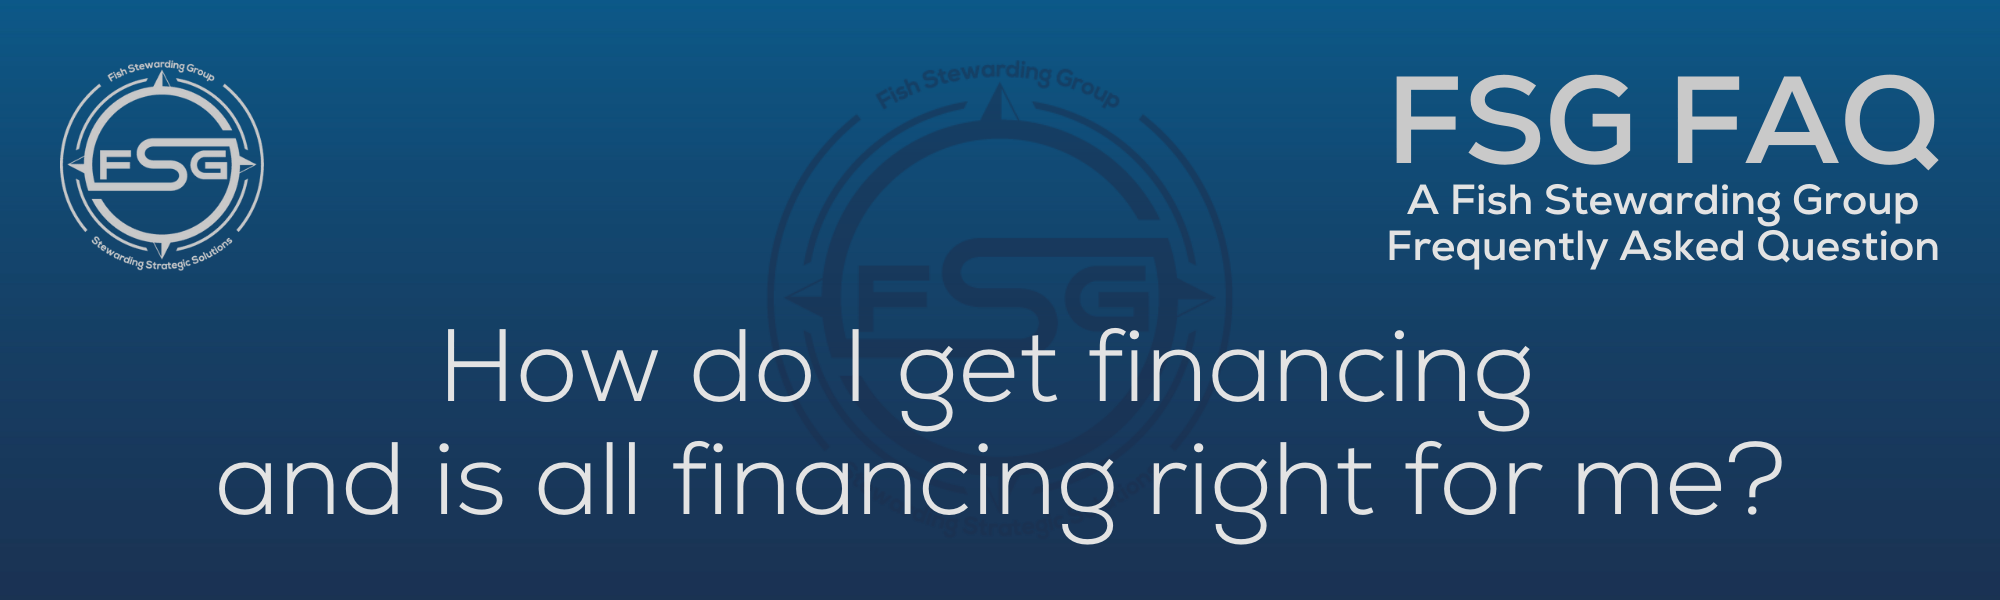 A rectangular and long thing Footer FAQ Image on the bottom of the How do I get financing? Page on the website. The background is a blue gradient color that goes from a dark blue on the bottom to a lighter blue on top. The text in lower center of the image in a light gray text that reads: How do I get financing? The text in gray in the upper right corner reads: FSG FAQ. Right beneath that is more gray text in a smaller font that reads: A Fish Stewarding Group Frequently Asked Question. On the upper left side is the FSG Logo in gray. The logo has the letters FSG in the middle with a circle with four pointed arrows facing north, south, east and west with the S connected to that circle. Four rounded lines make the next circle of the circle and the last layer is a thin circle with the text on the Bottom that reads Stewarding Strategist Solutions and on top, the text reads Fish Stewarding Group. And Lastly in the center background of the image is a watermarked FSG logo, faded in blue, in the background.